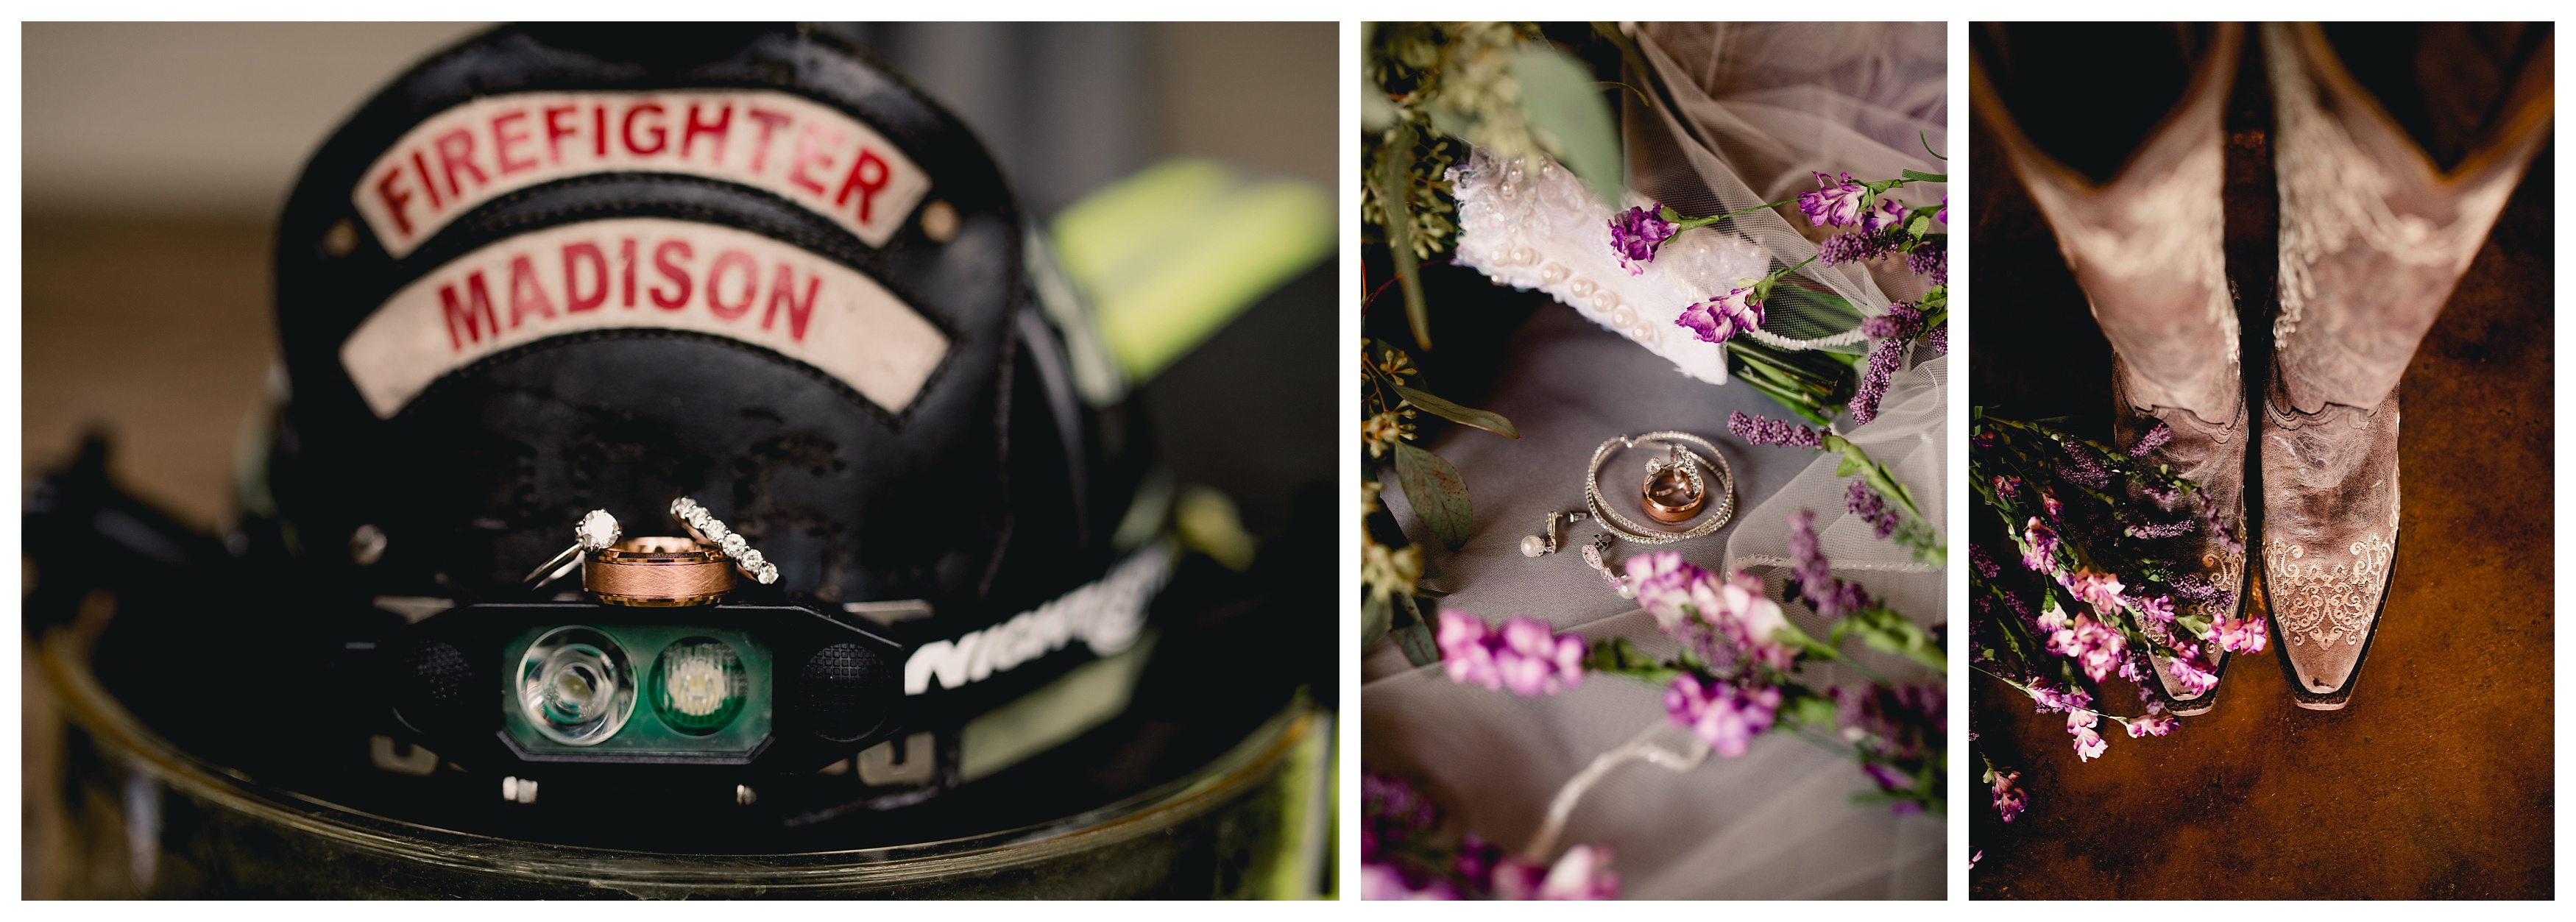 Fireman detail photos for wedding. Shelly Williams Photography